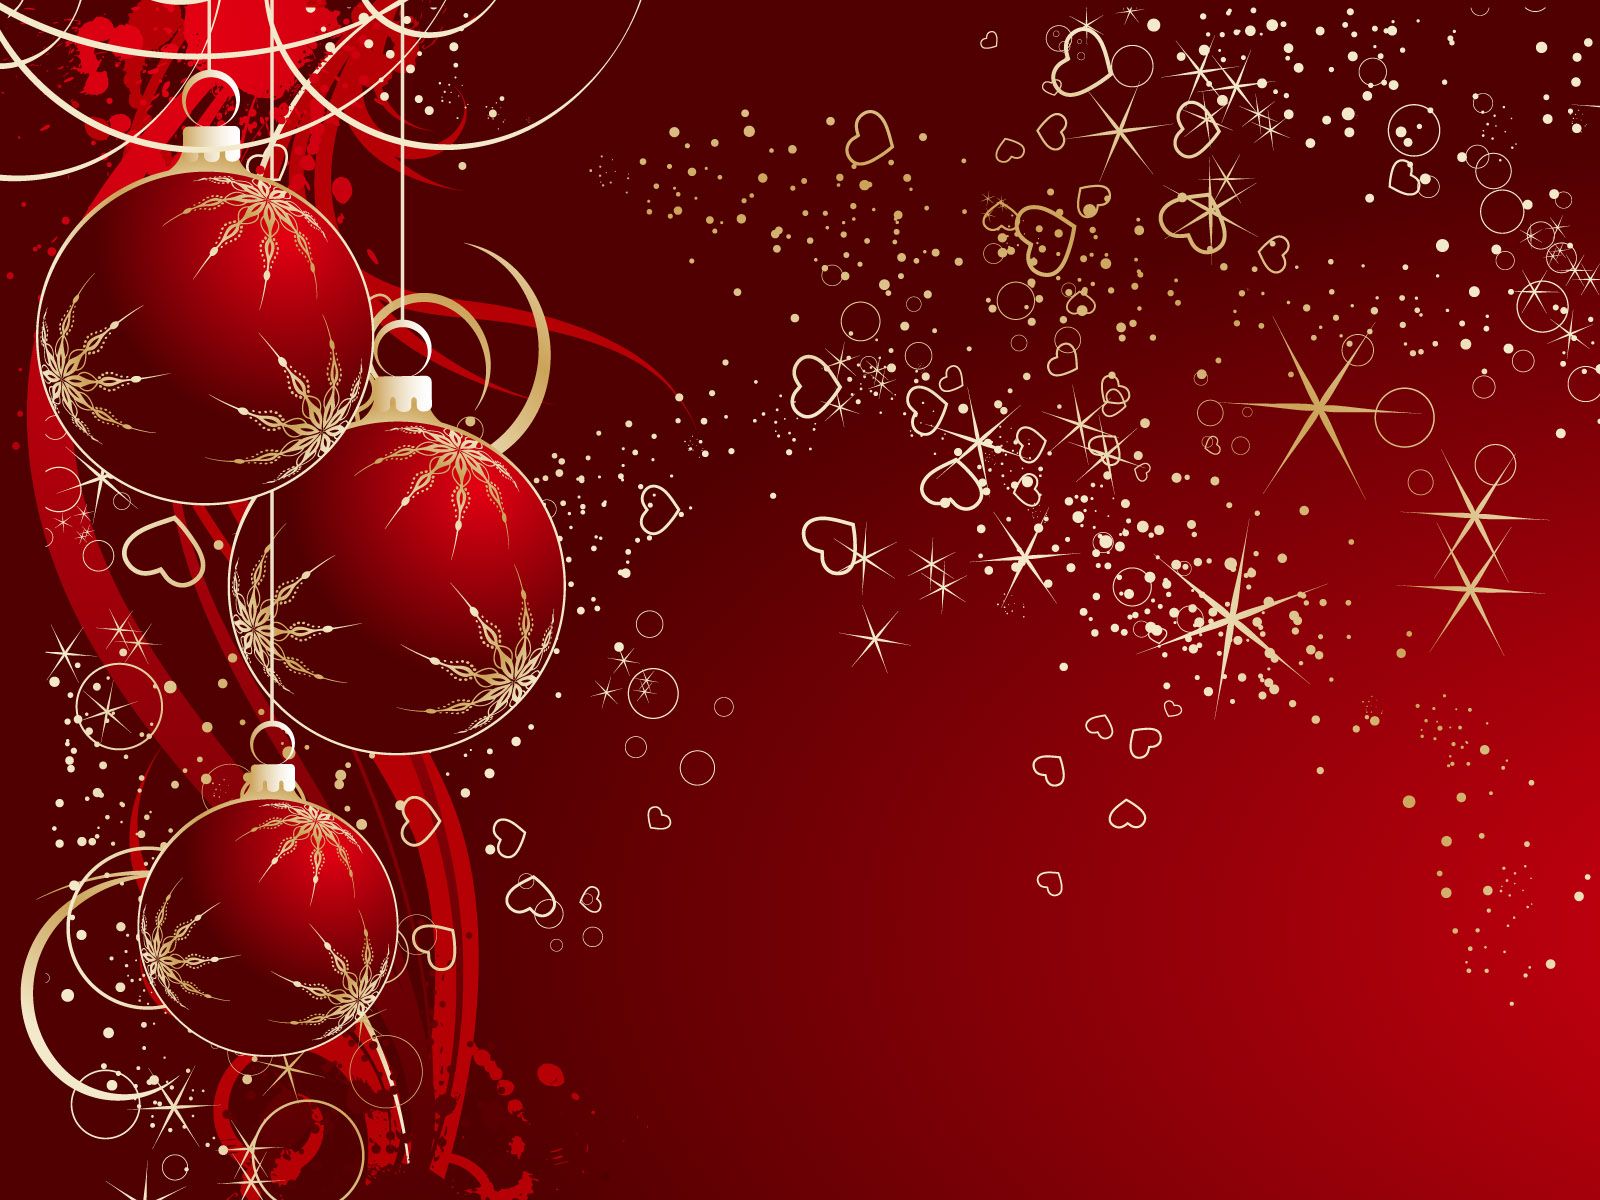 2015 hd Christmas backgrounds - wallpapers, images, photos, pictures |